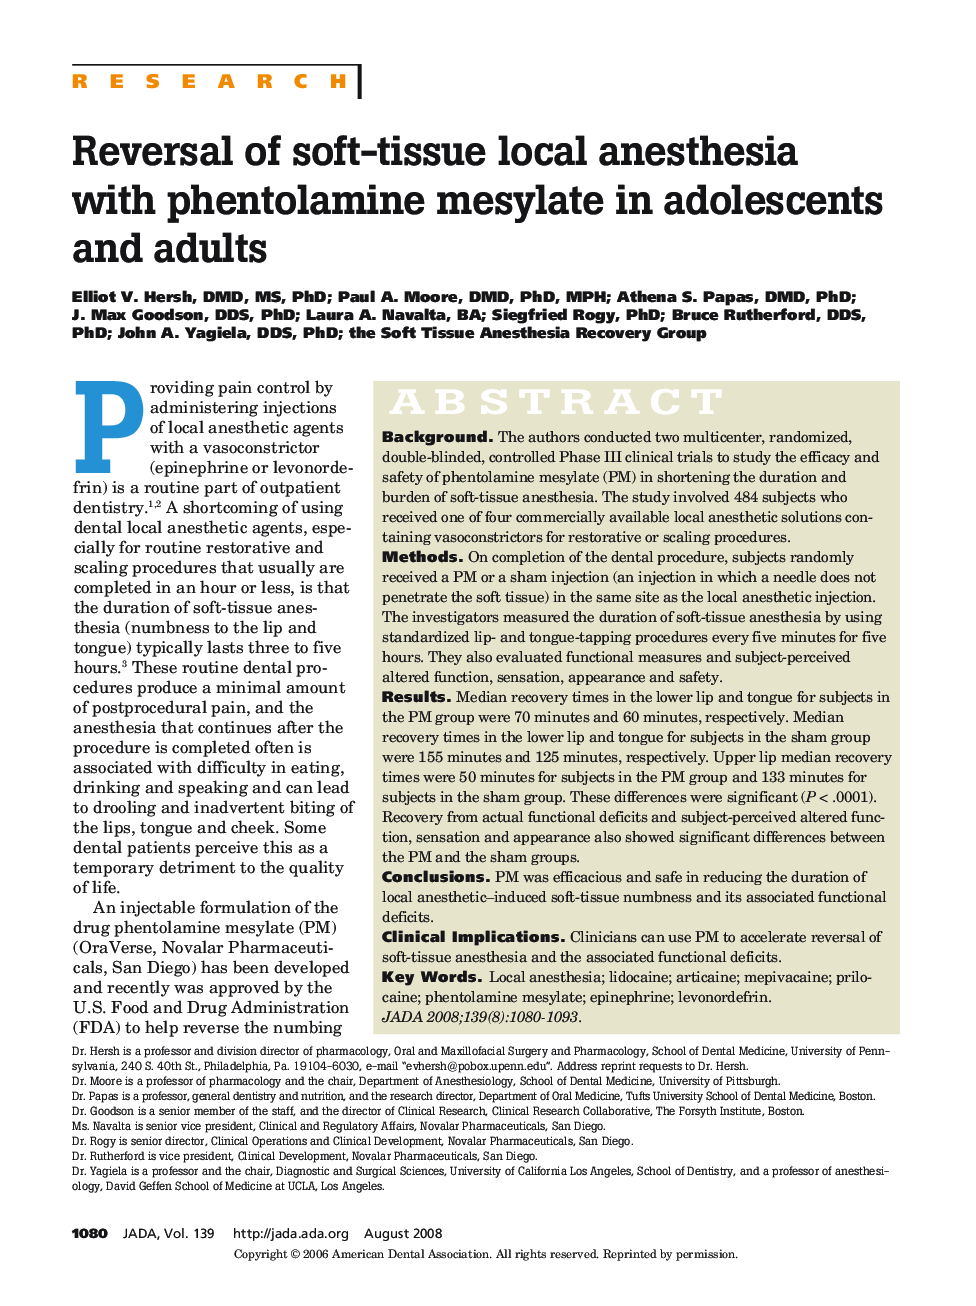 Reversal of Soft-Tissue Local Anesthesia With Phentolamine Mesylate in Adolescents and Adults